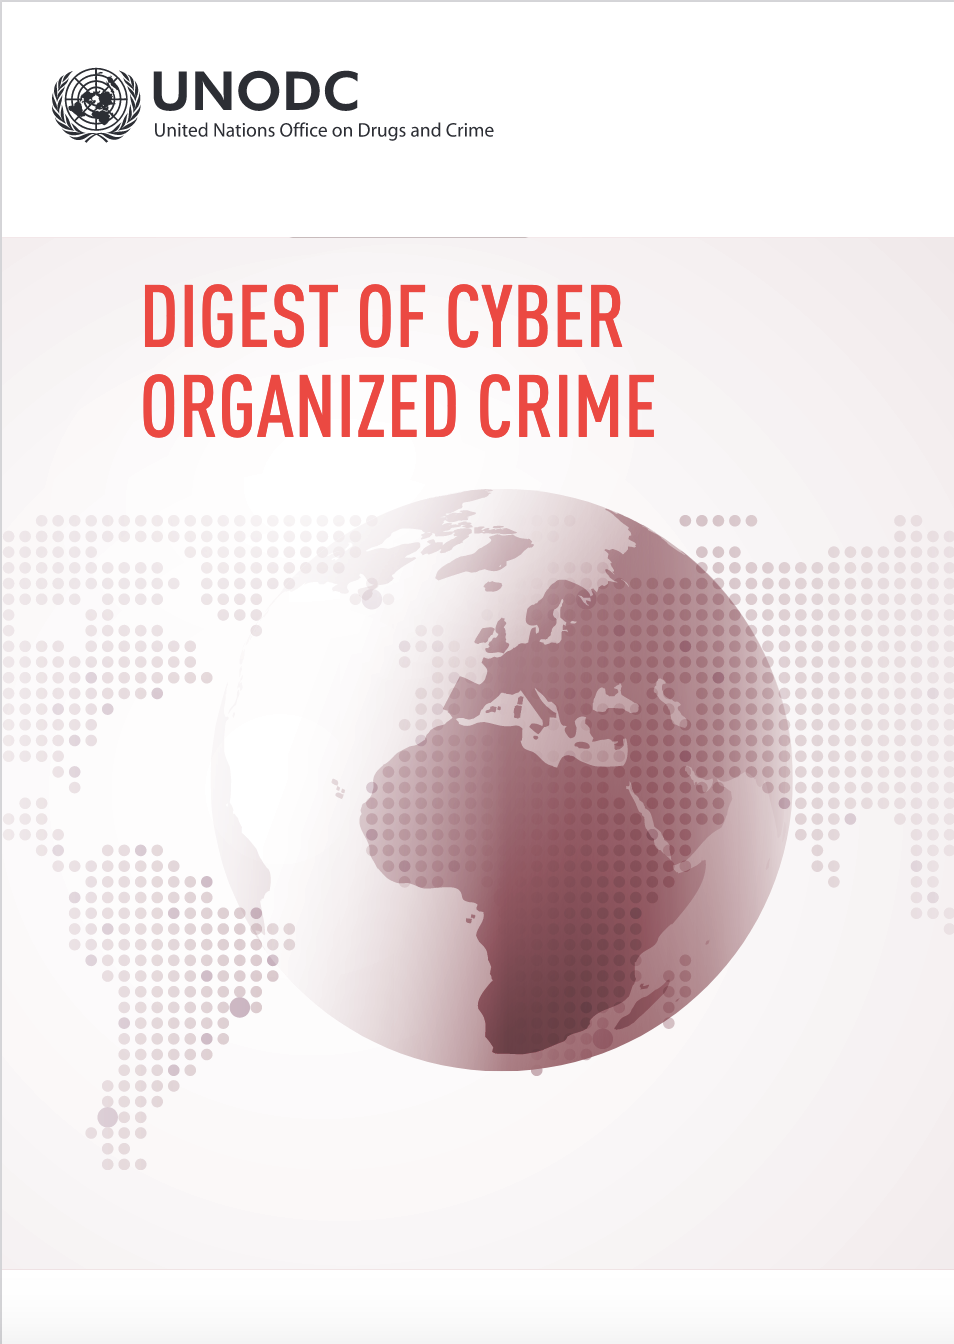  Cover page of the UNODC publication “Digest of Cases: Digest of Cyber Organized Crime”.